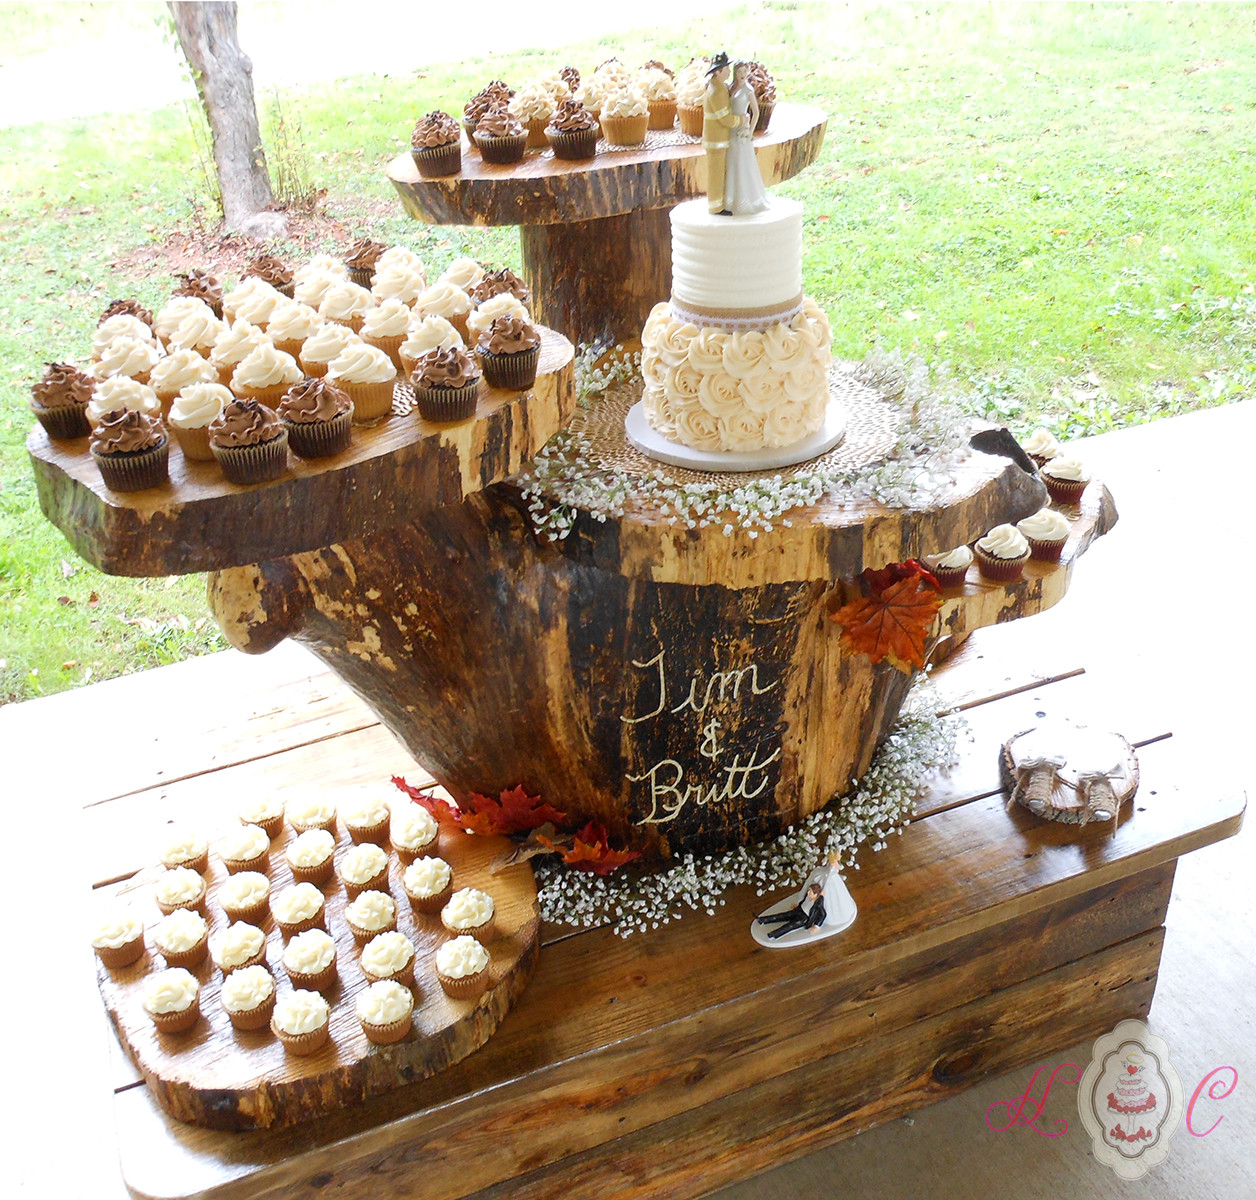 Rustic Wedding Cakes And Cupcakes
 Wedding Cakes in Marietta Parkersburg & More Heavenly